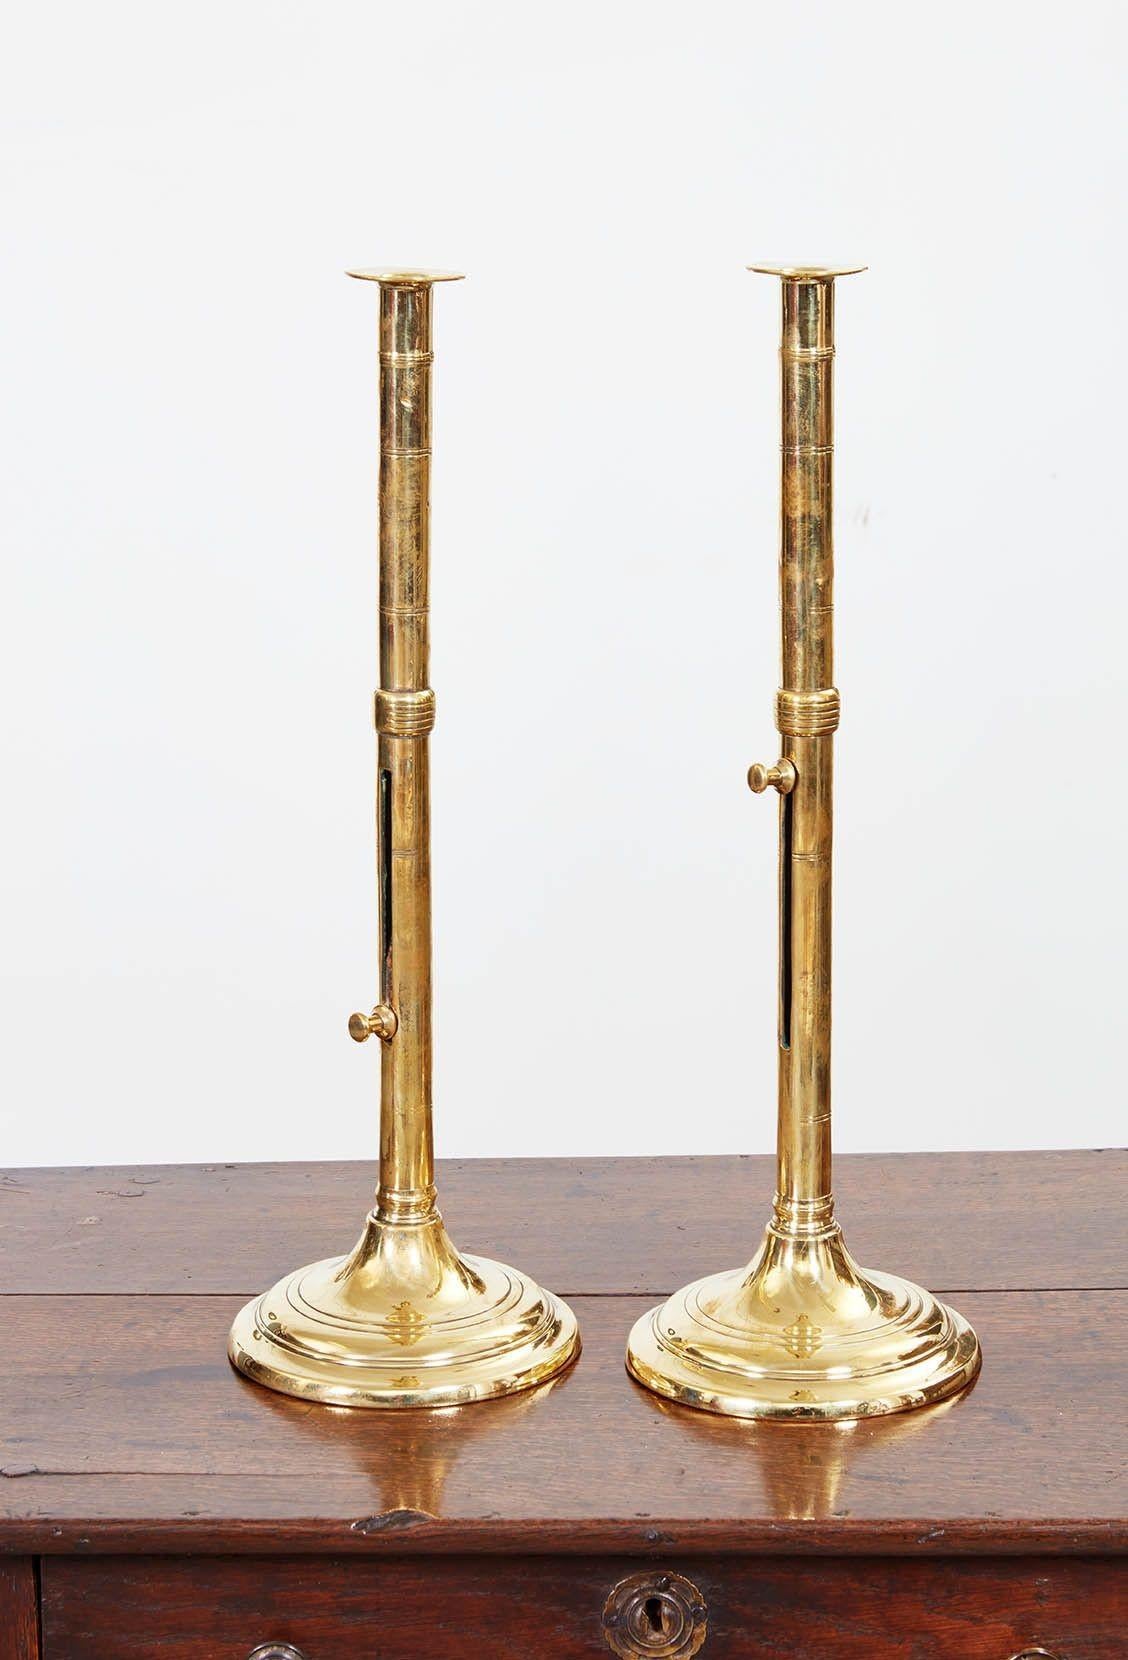 A pair of brass adjustable candlesticks having tall shafts with slide adjuster knob and mid-shaft ring turnings, surmounted by drip guard and standing on turned base. English, circa 1830.